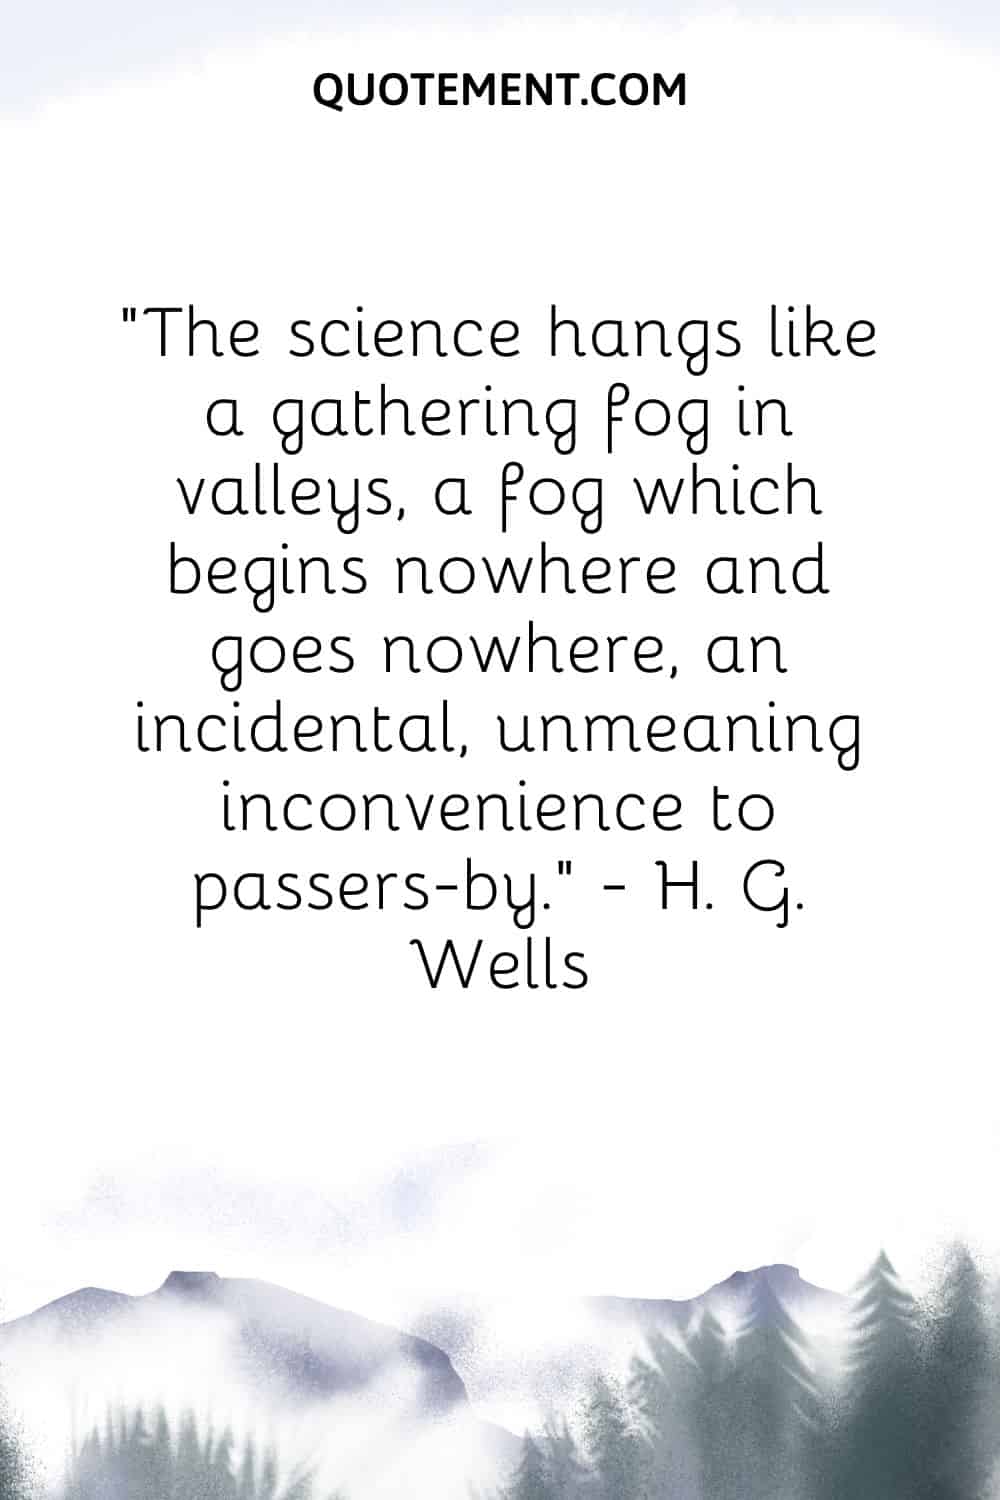 The science hangs like a gathering fog in valleys